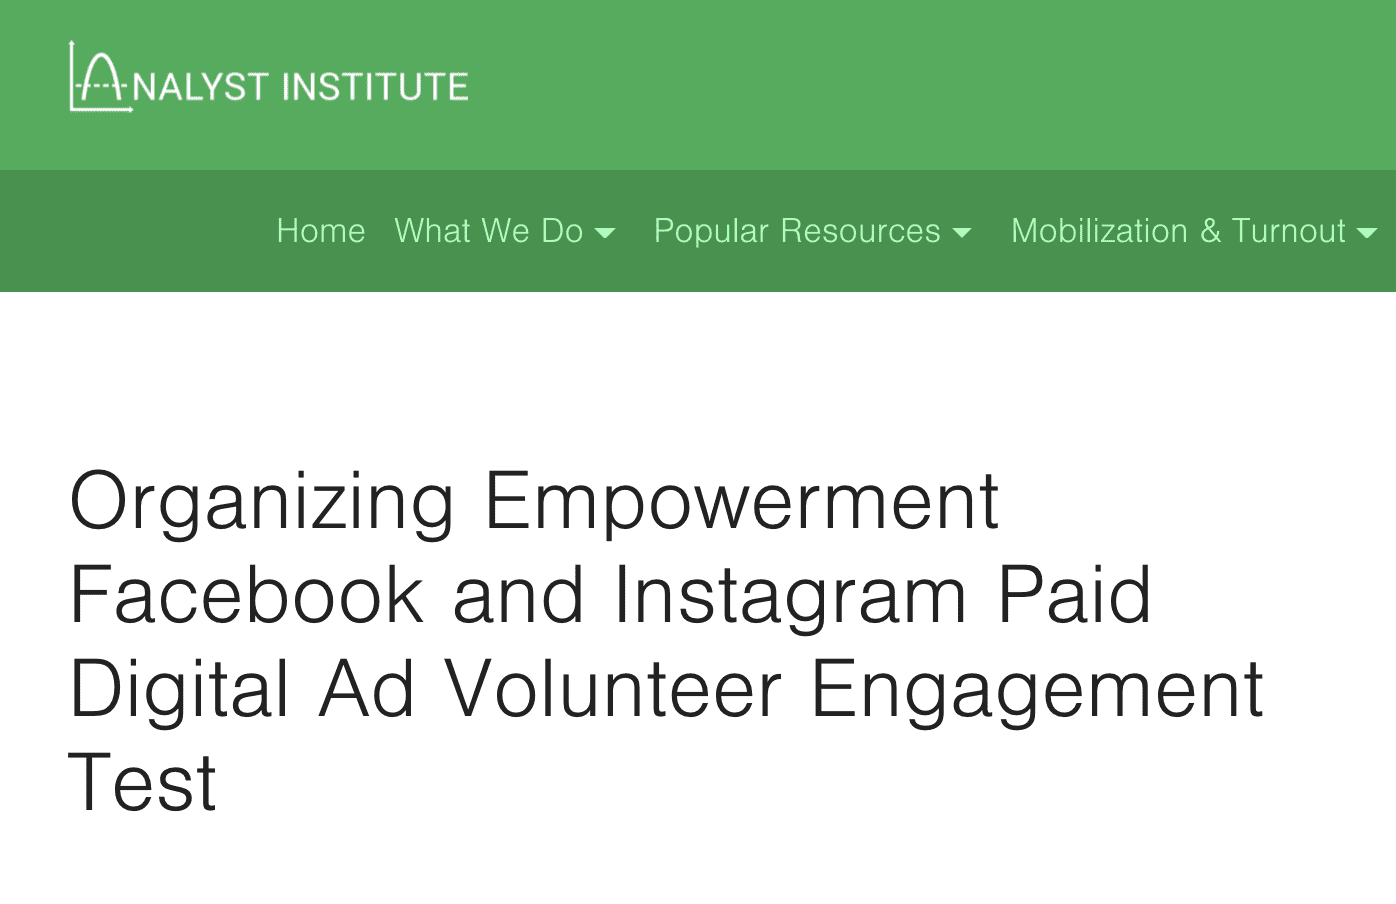 Empower Project Facebook and Instagram Paid Digital Ad Volunteer Engagement Test